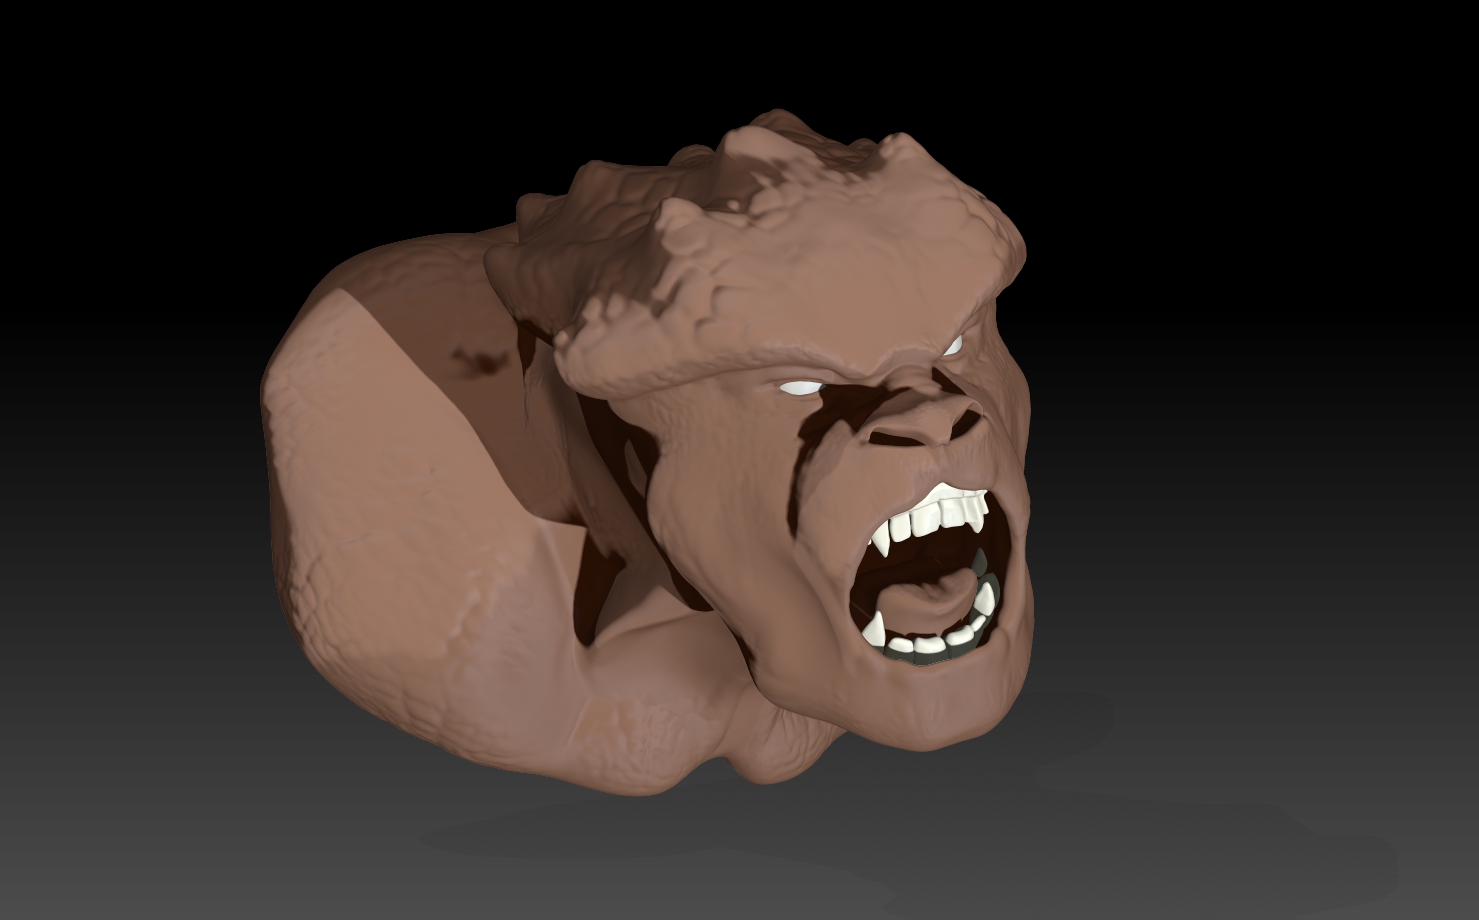 A render of an angry looking creature